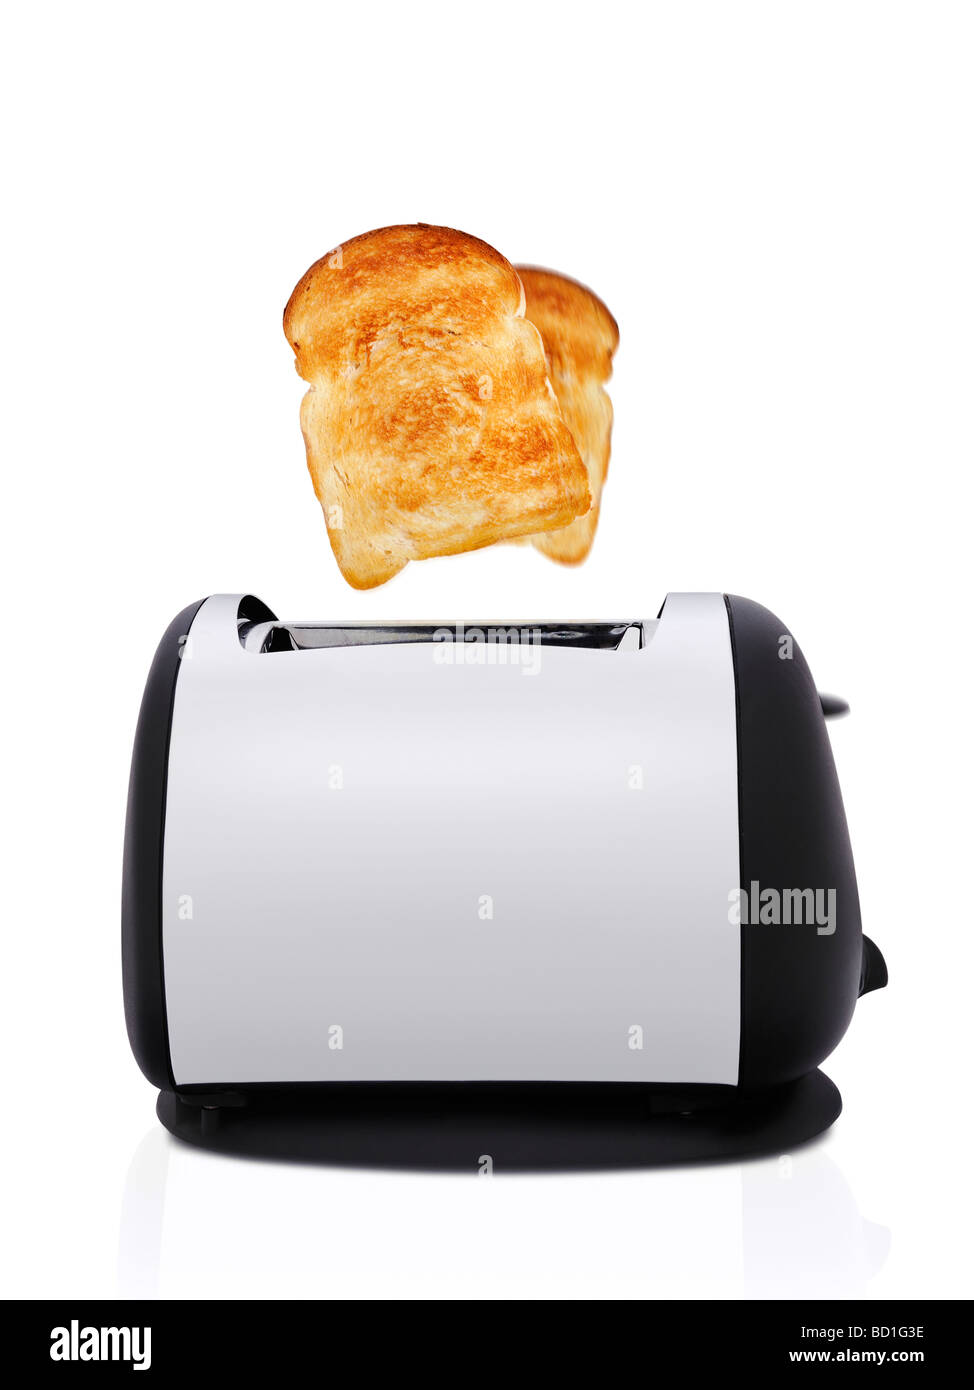 Toaster with Toast Popping Out Stock Photo